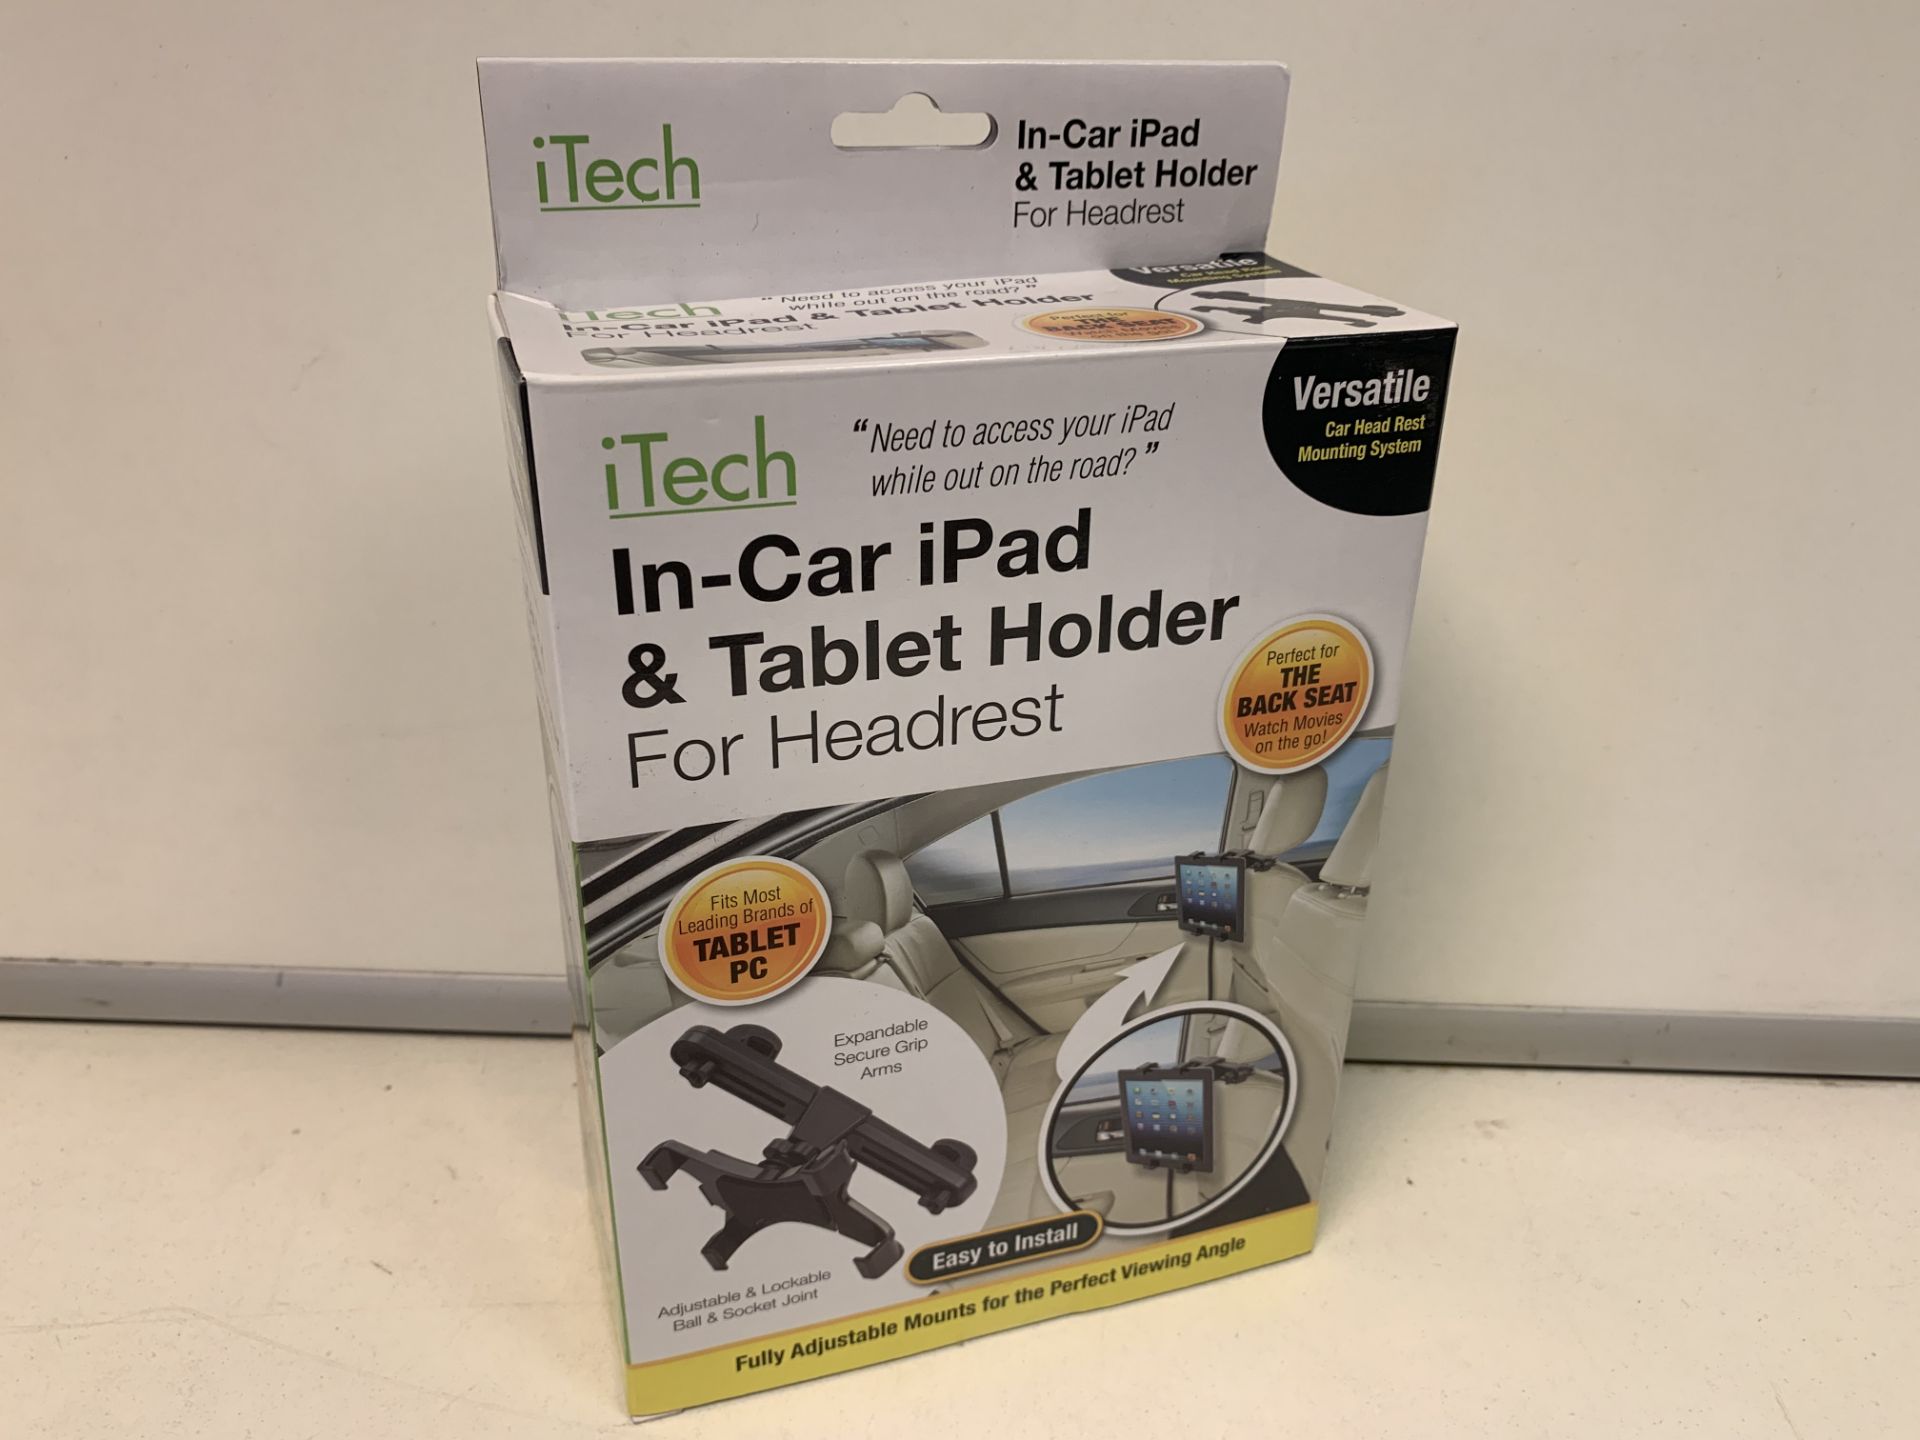 30 X NEW BOXED iTECH In-CAR iPAD & TABLET HOLDER FOR HEADREST. VERSATILE CAR HEAD REST MOUNTING